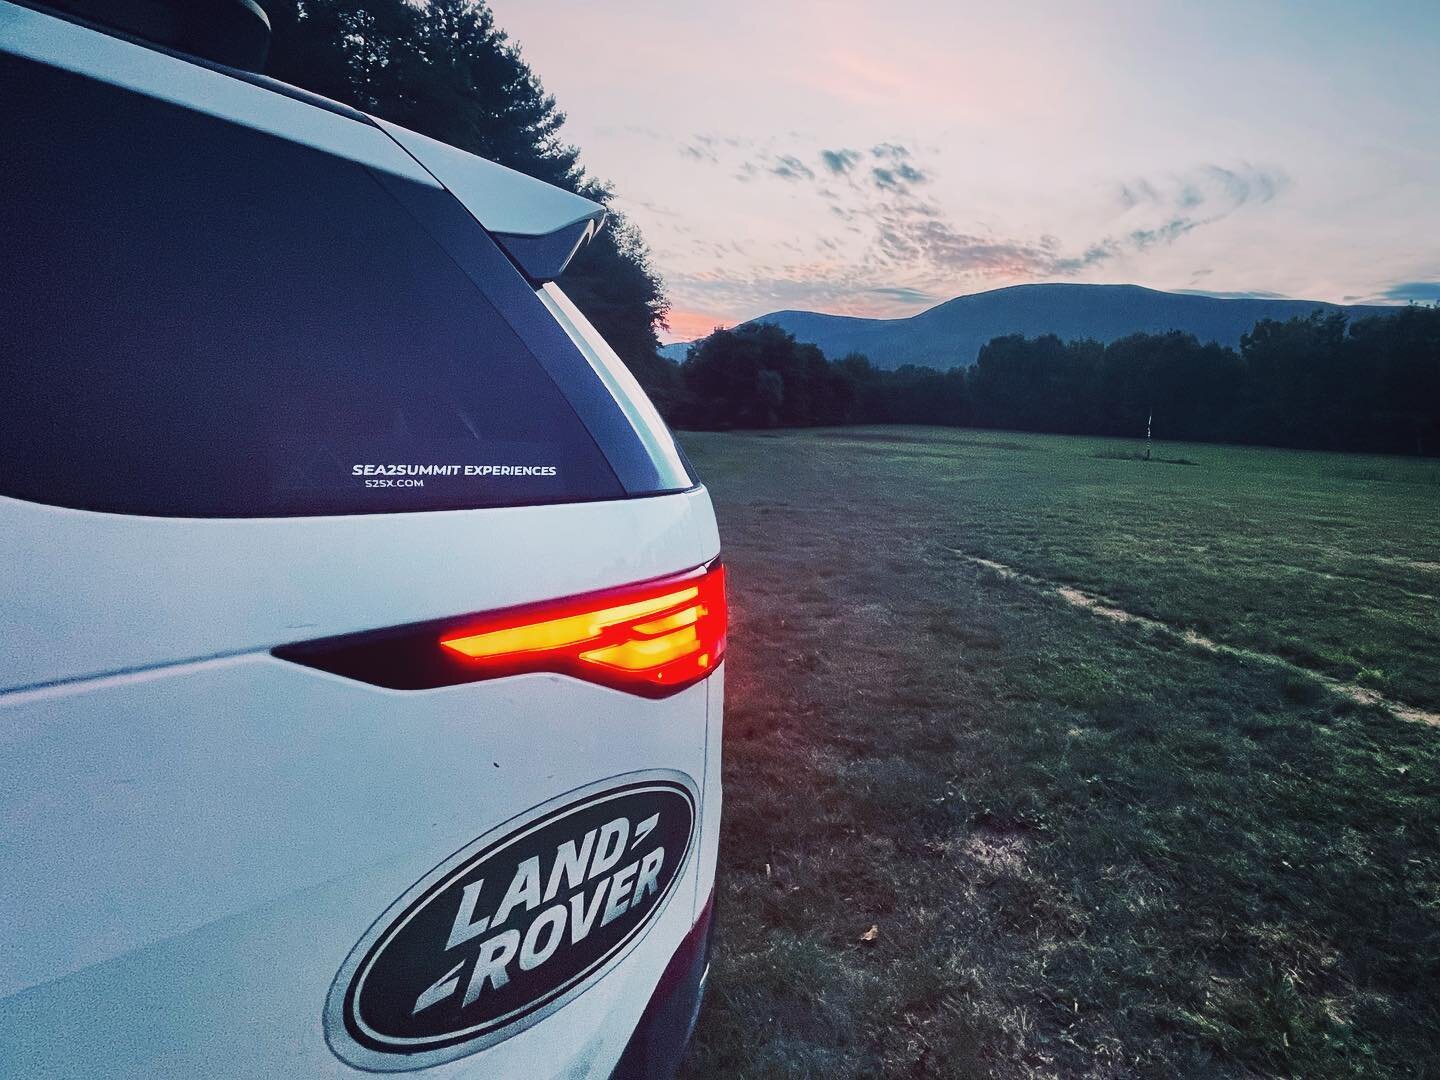 Finally good weather! The teams tonight should be able to stay dry and have a good sleep. 

#landrover #landrovertrek #vermont #best4x4xfar